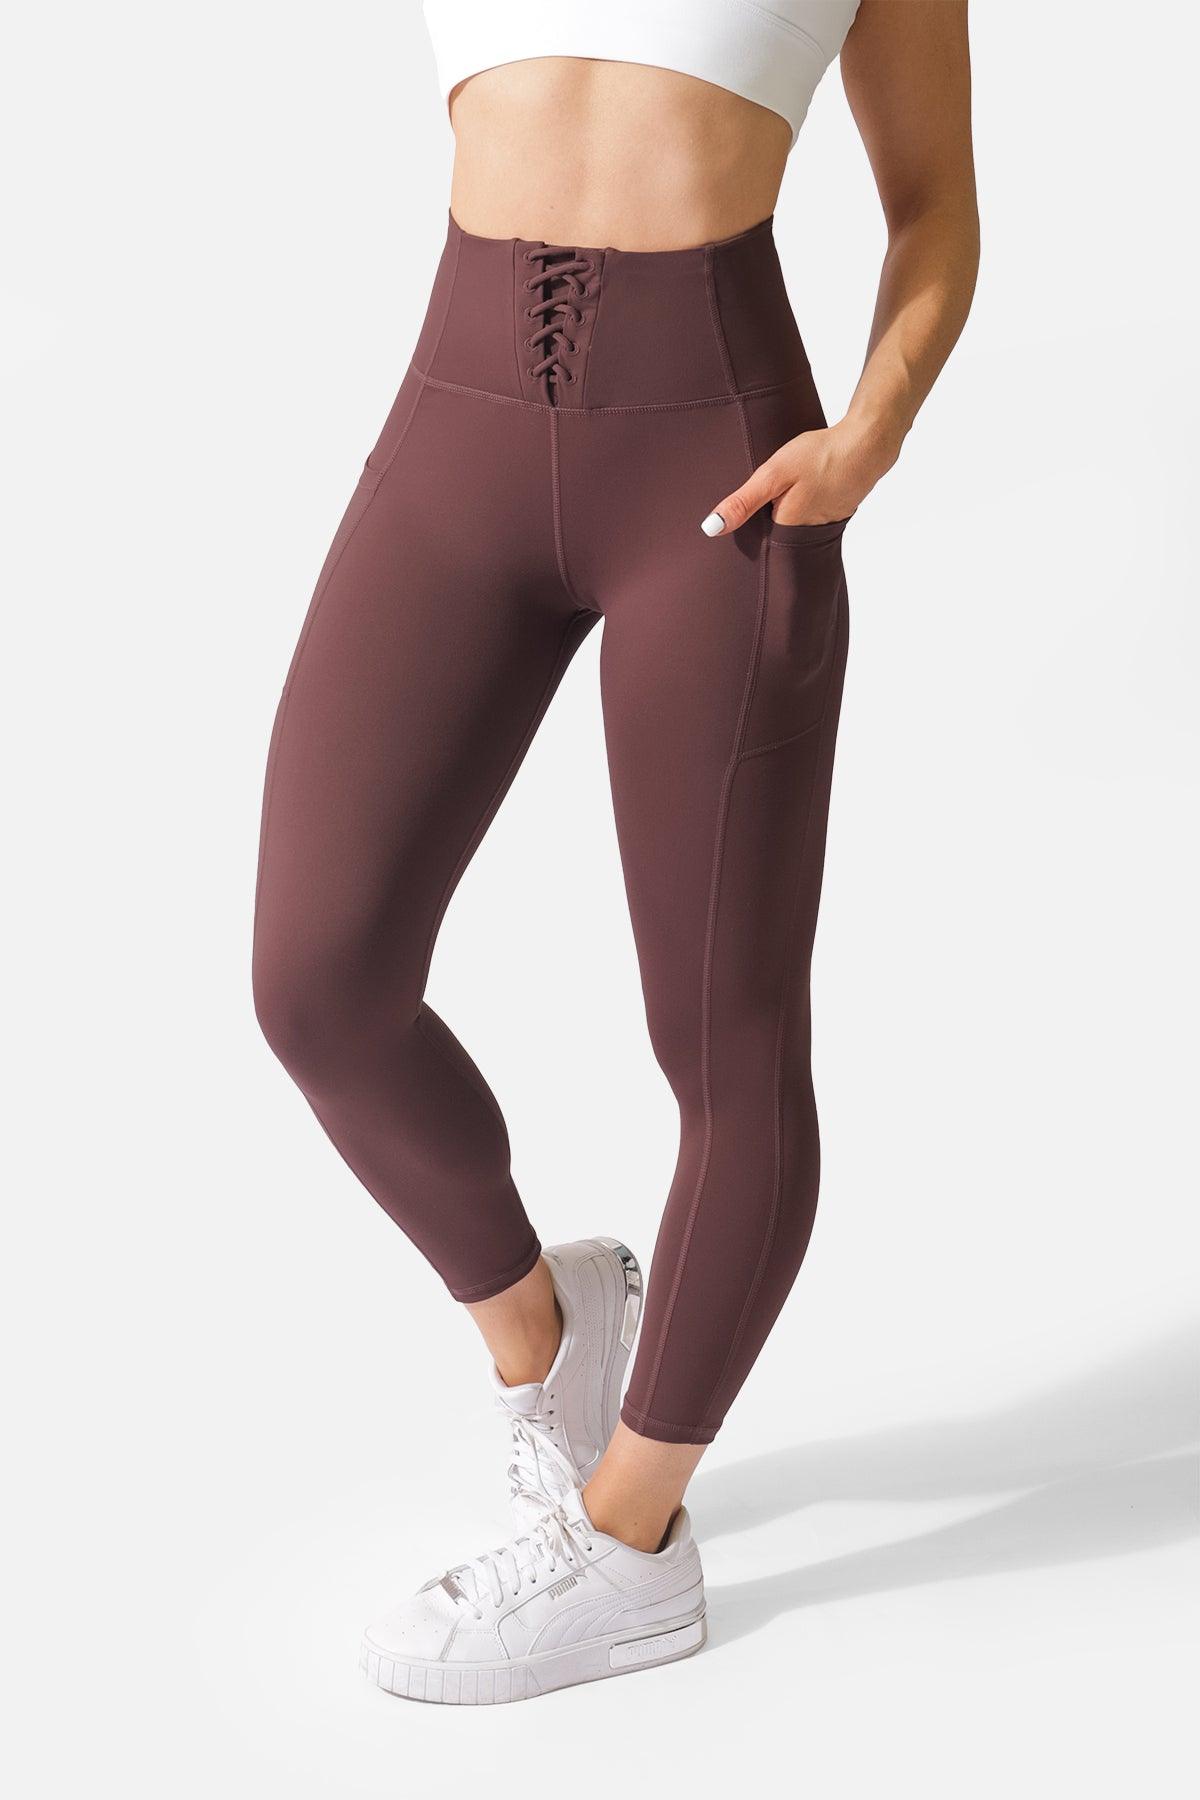 Lacey Pocket Leggings - Brown - Jed North Canada